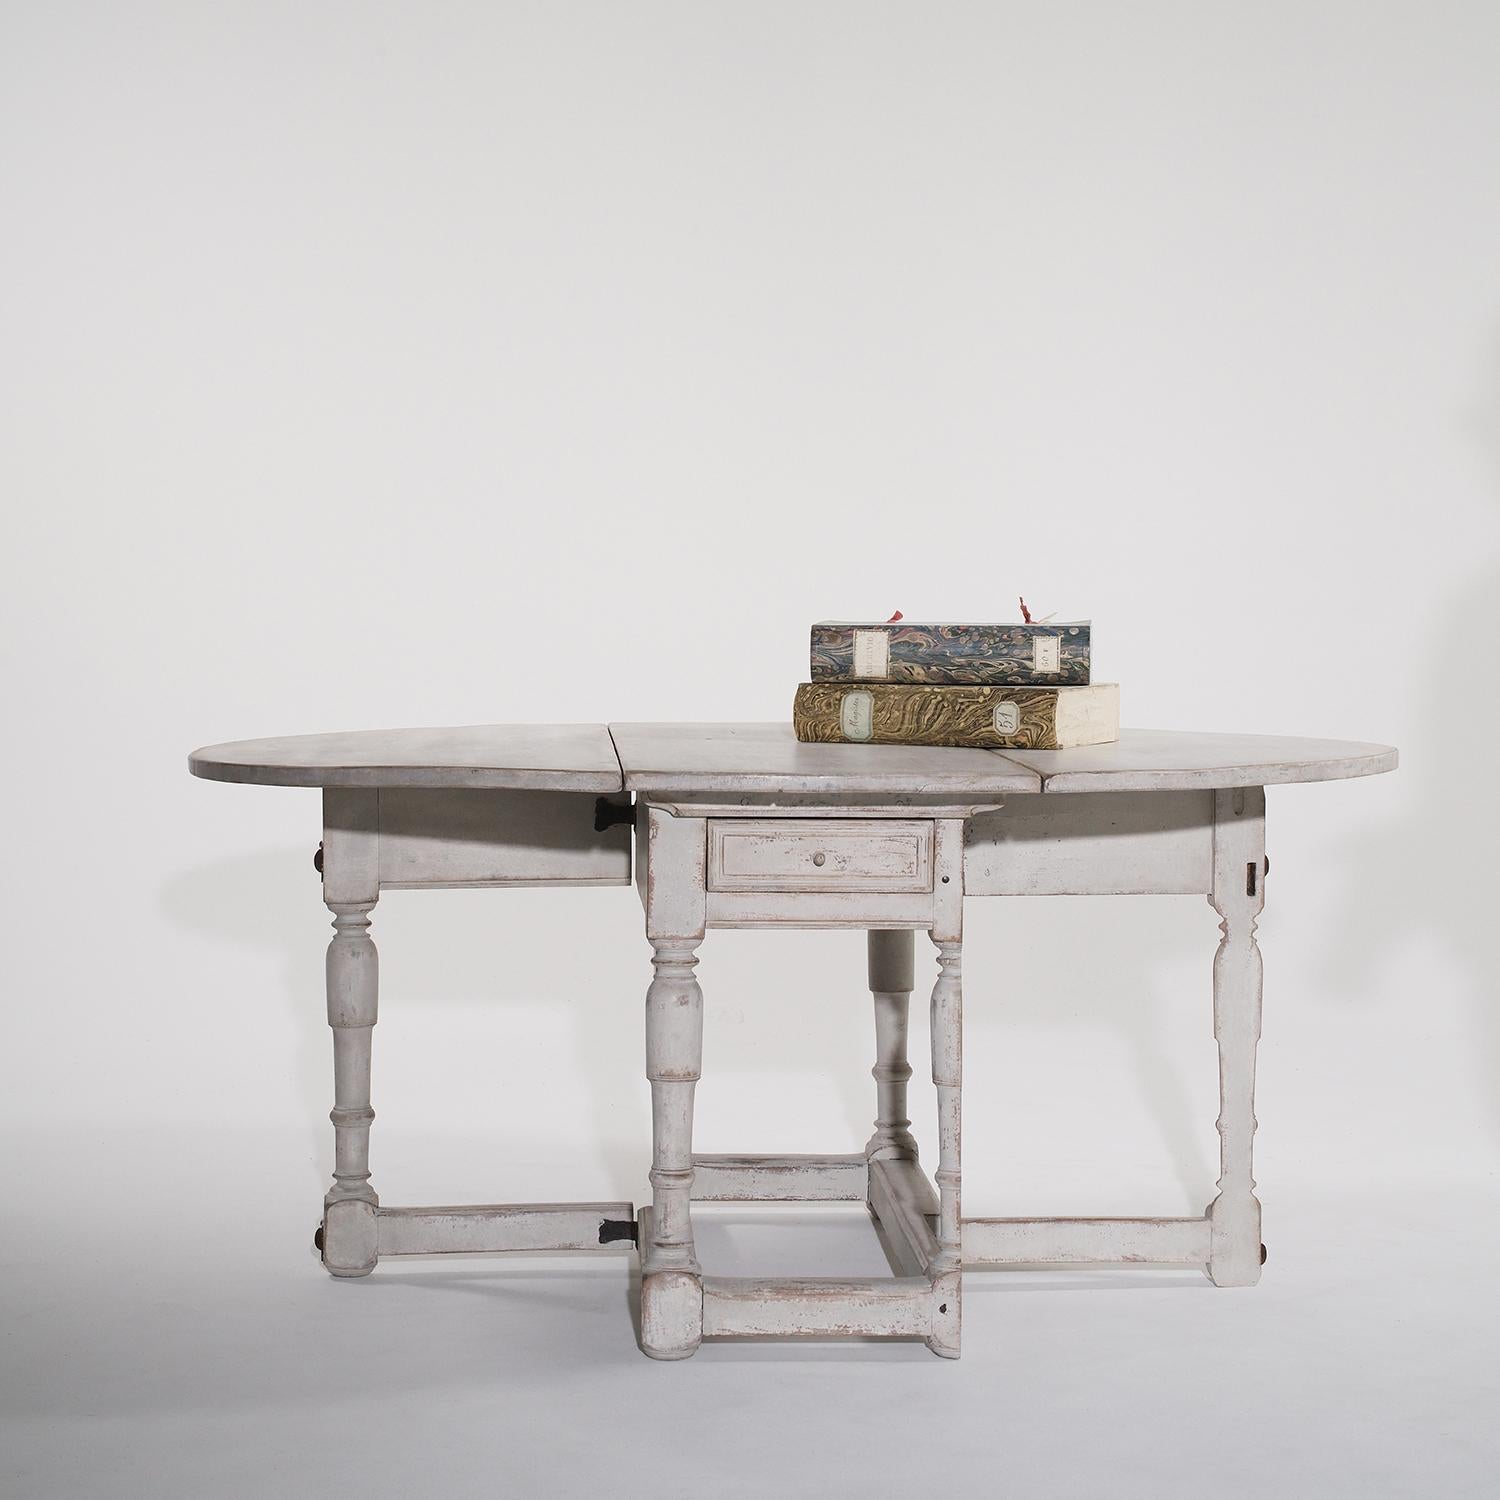 A light-grey, antique Swedish Gustavian drop-leaf table with one drawer, made of hand crafted painted Pinewood, particularized in the Neoclassical Greek style, in good condition. The half round Scandinavian dining table is supported by four round